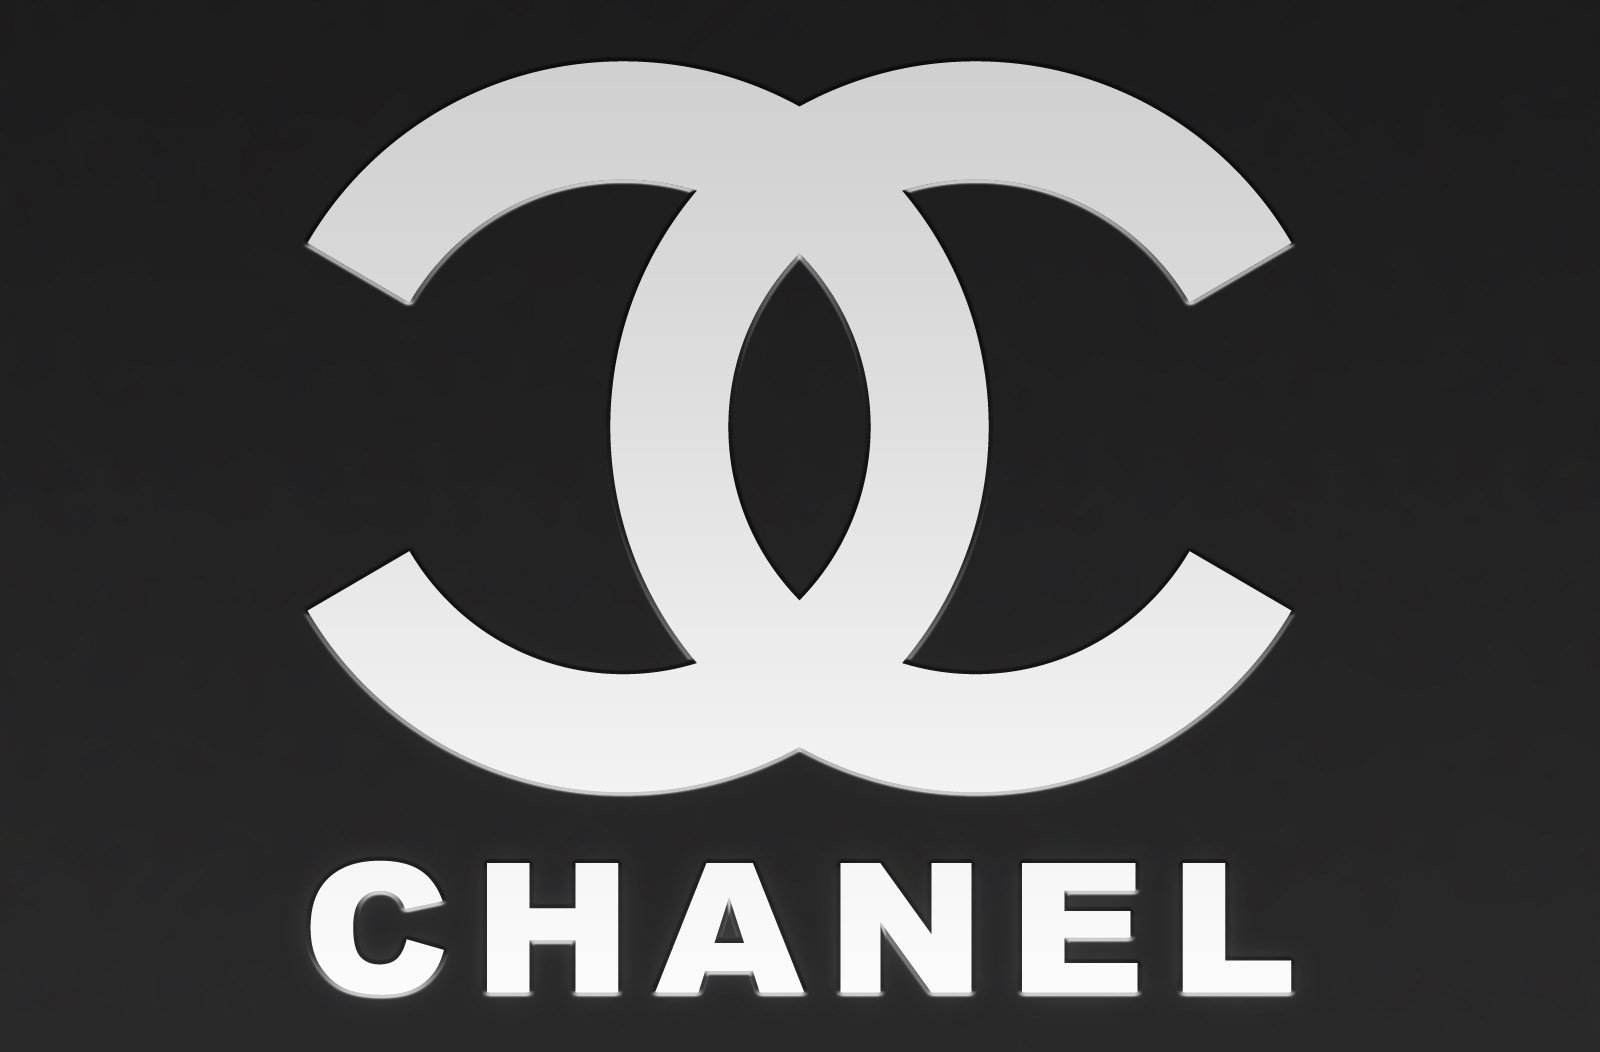 Chanel Sign Meaning